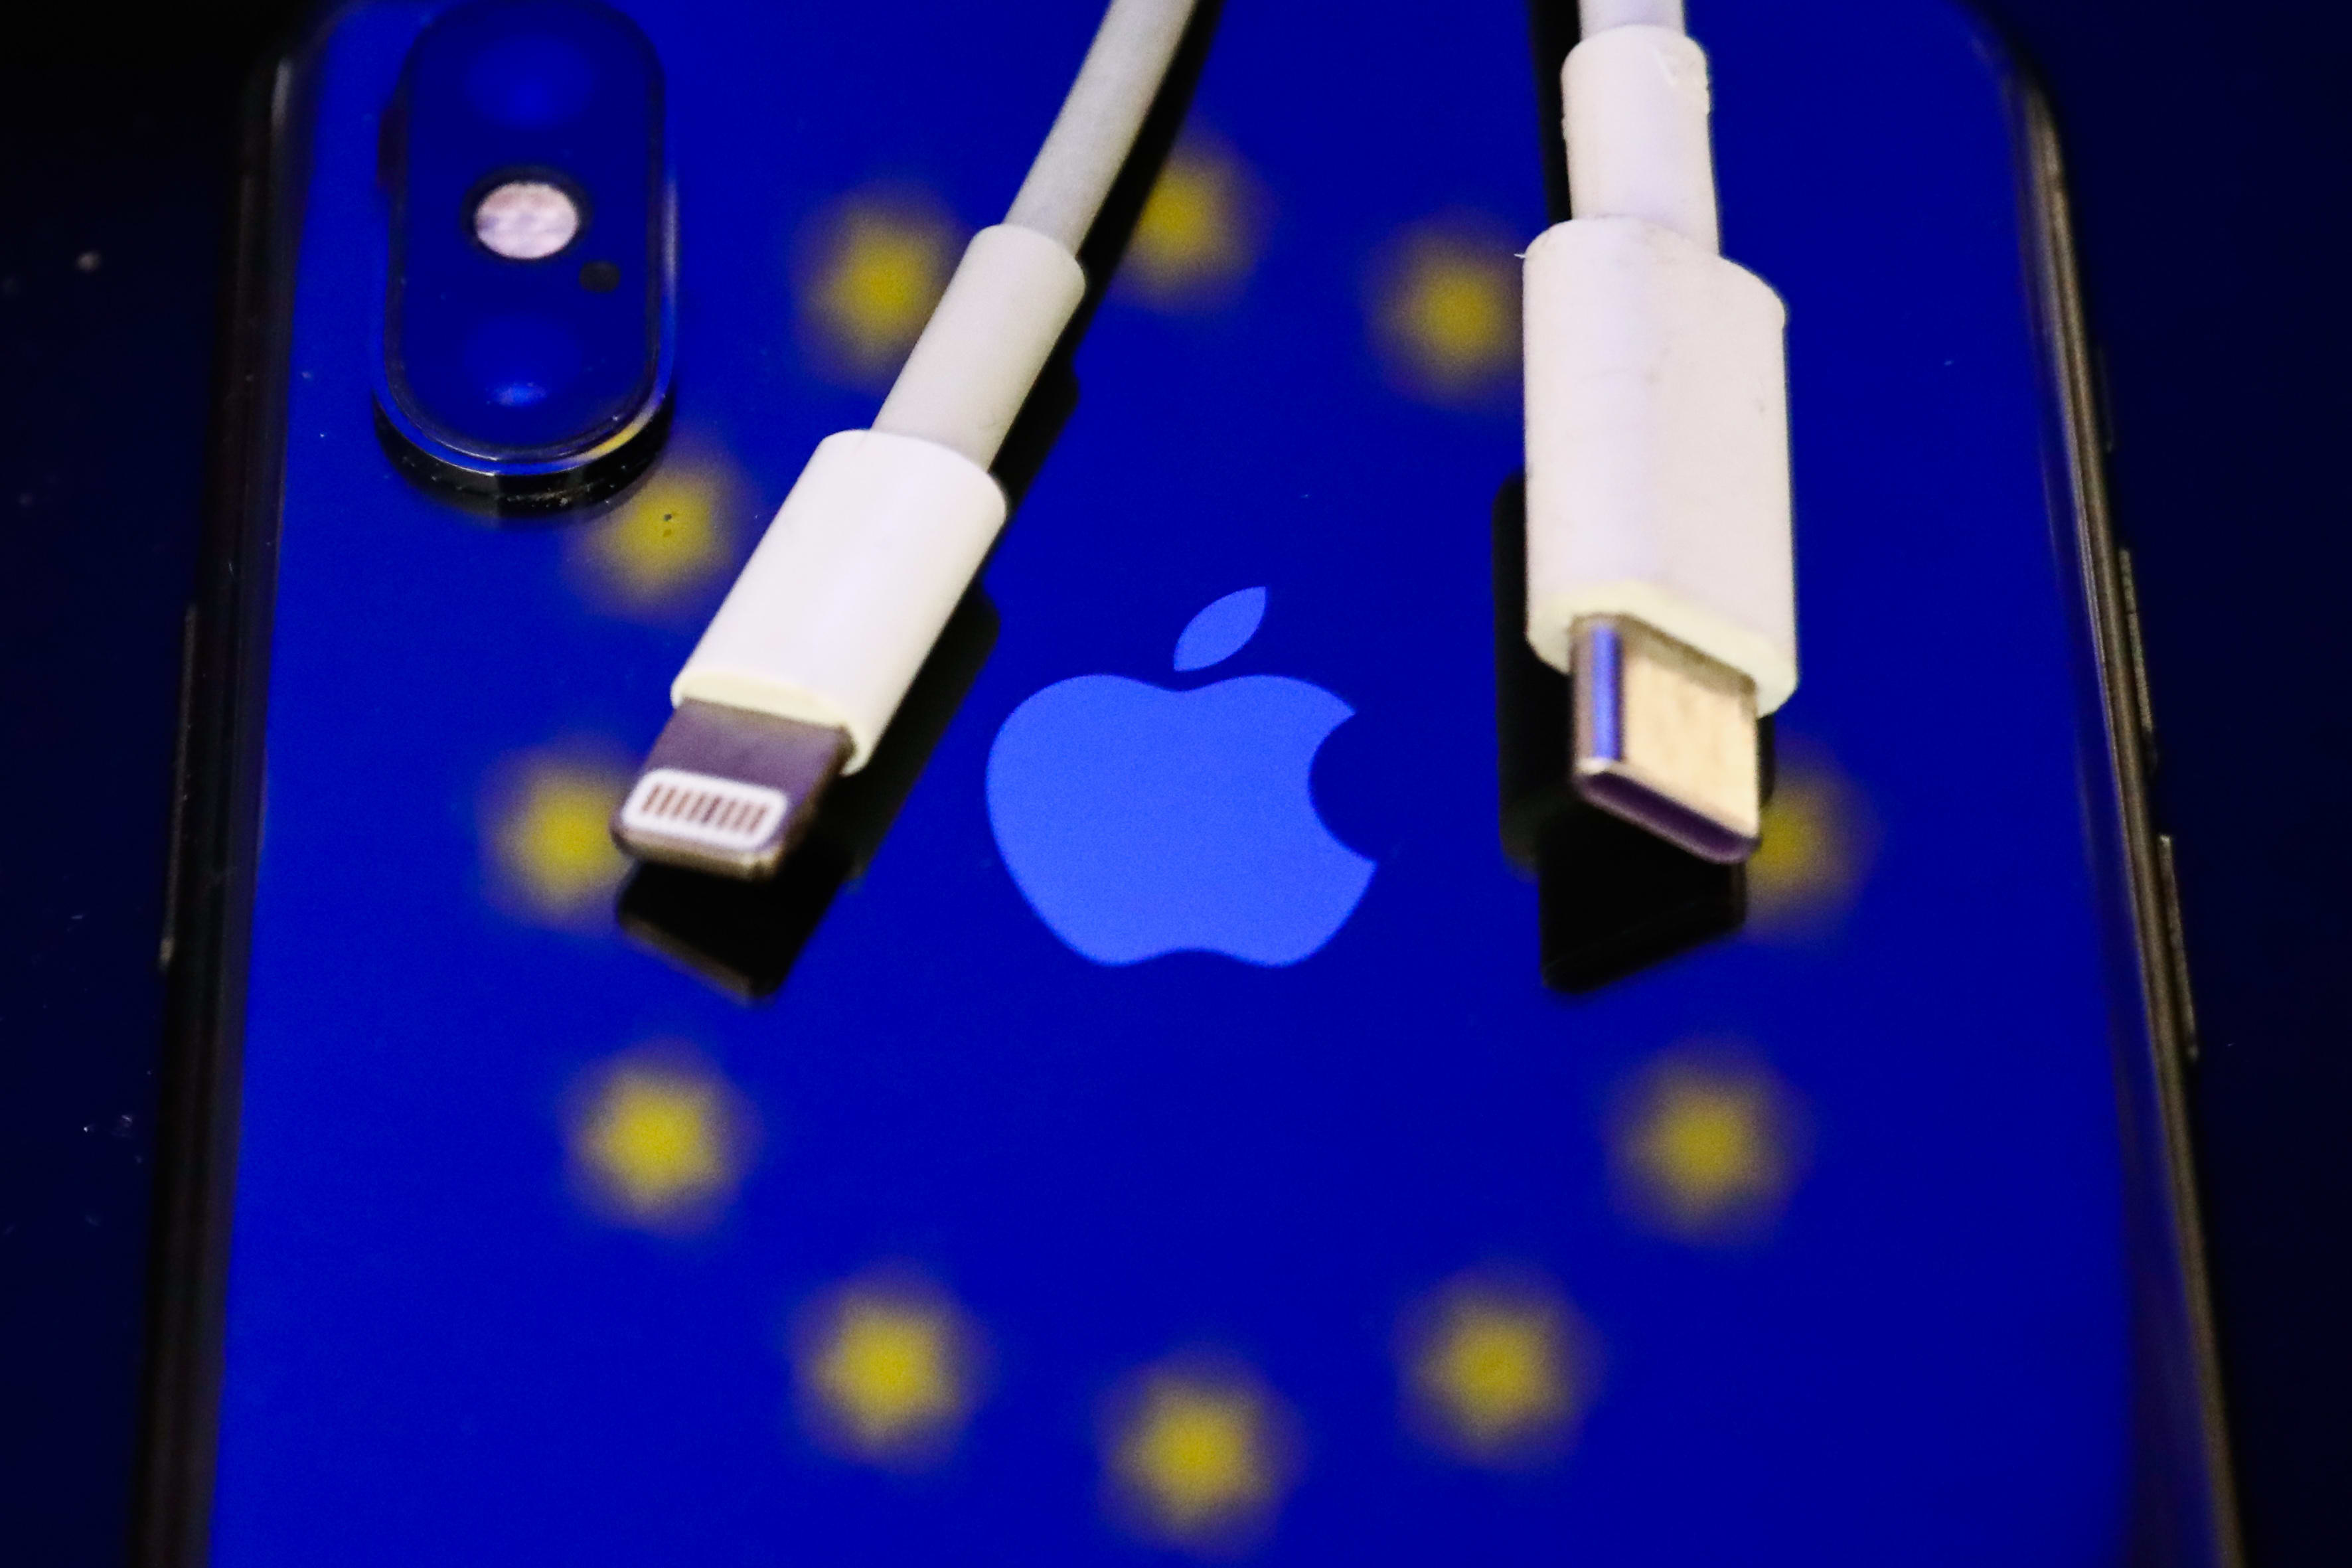 Apple confirms iPhone to get USB-C charging to comply with EU law